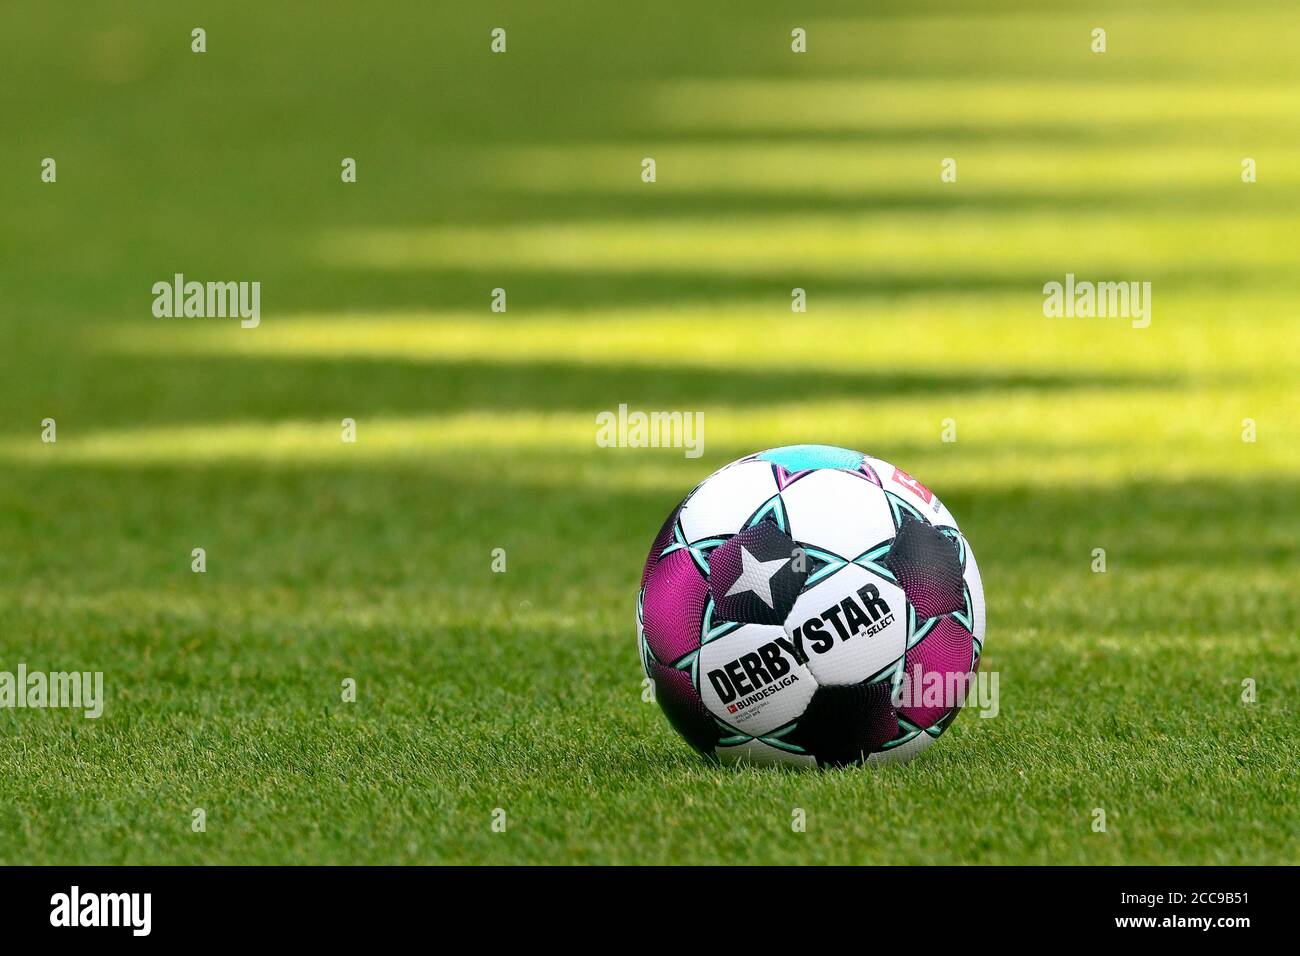 The official league ball from Derbystar for the german 1st Bundesliga. Stock Photo